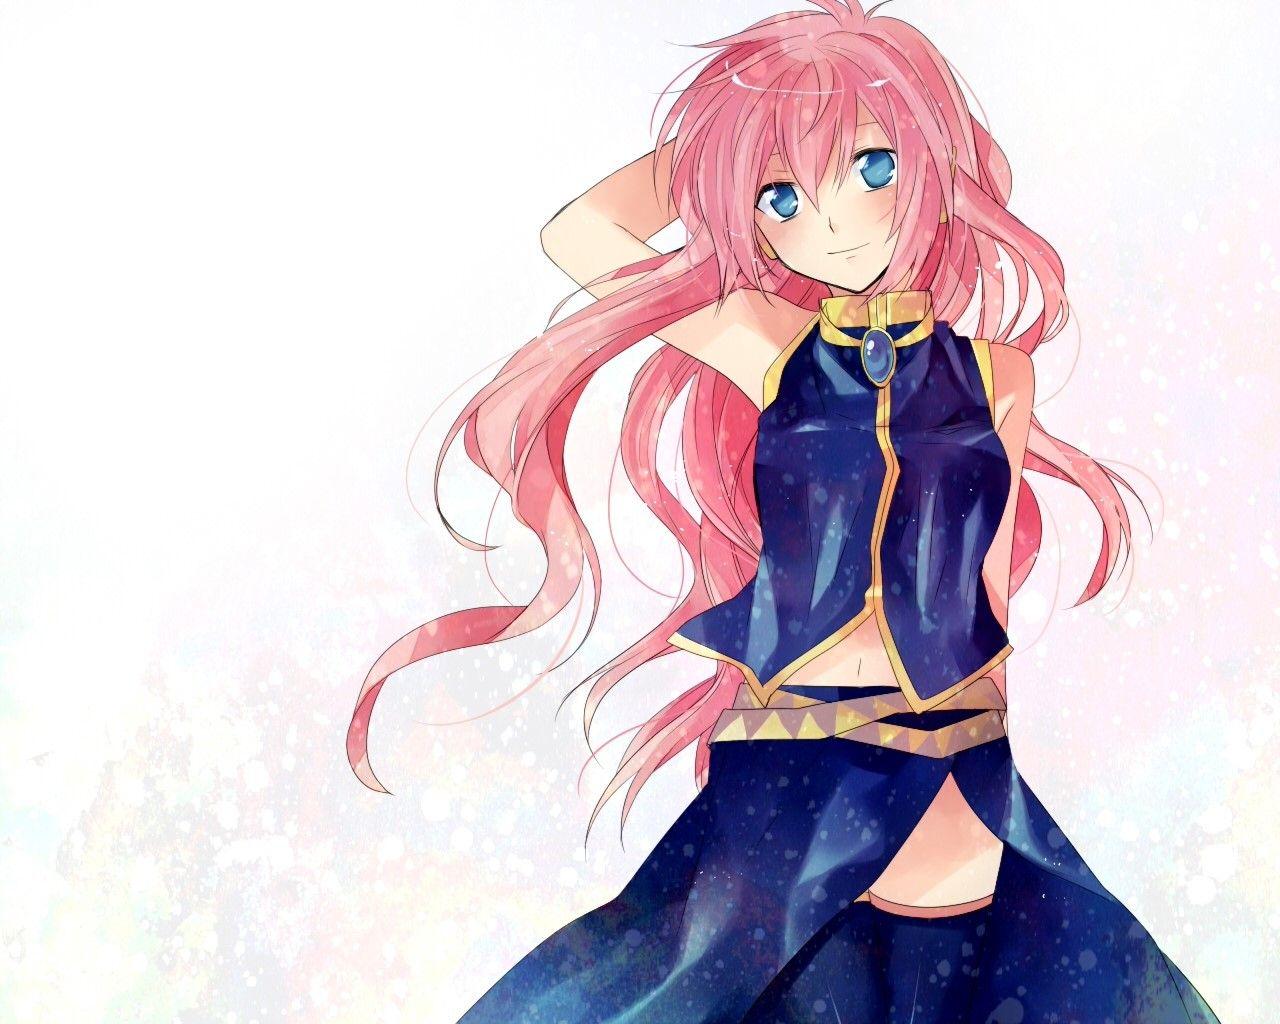 6. Blue and Pink Hair Anime Girl Aesthetic - wide 8